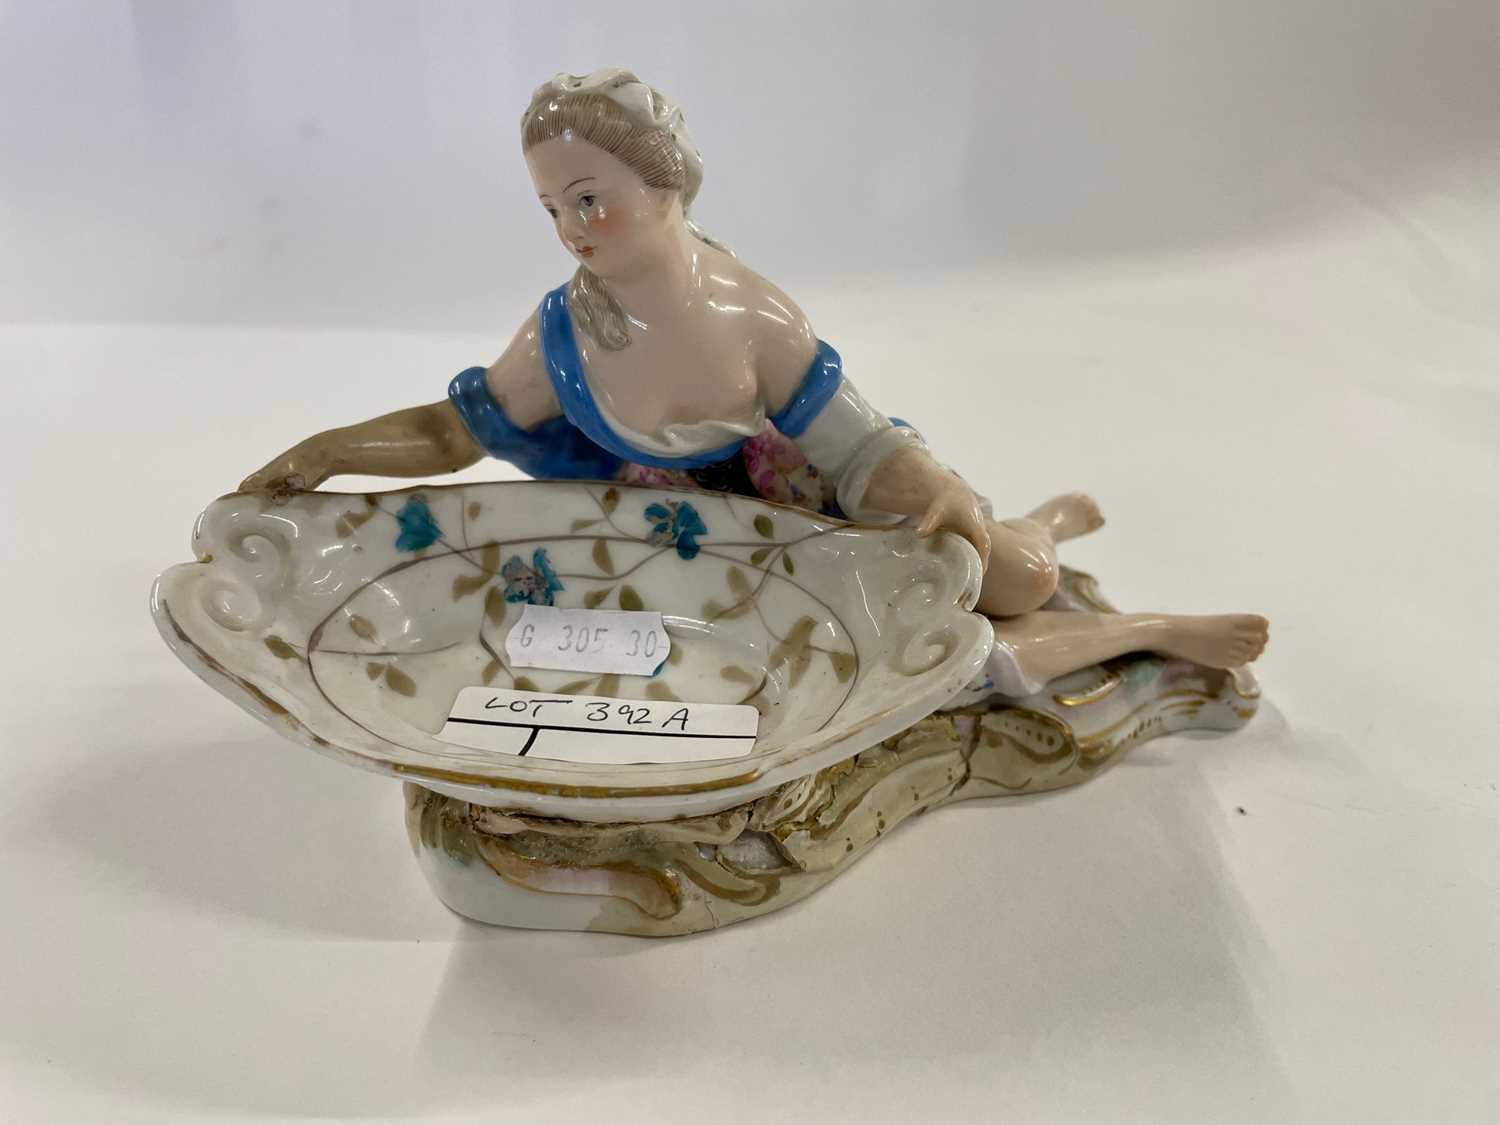 19th Century Meissen sweetmeat figure modelled as a young girl holding a tray (a/f)